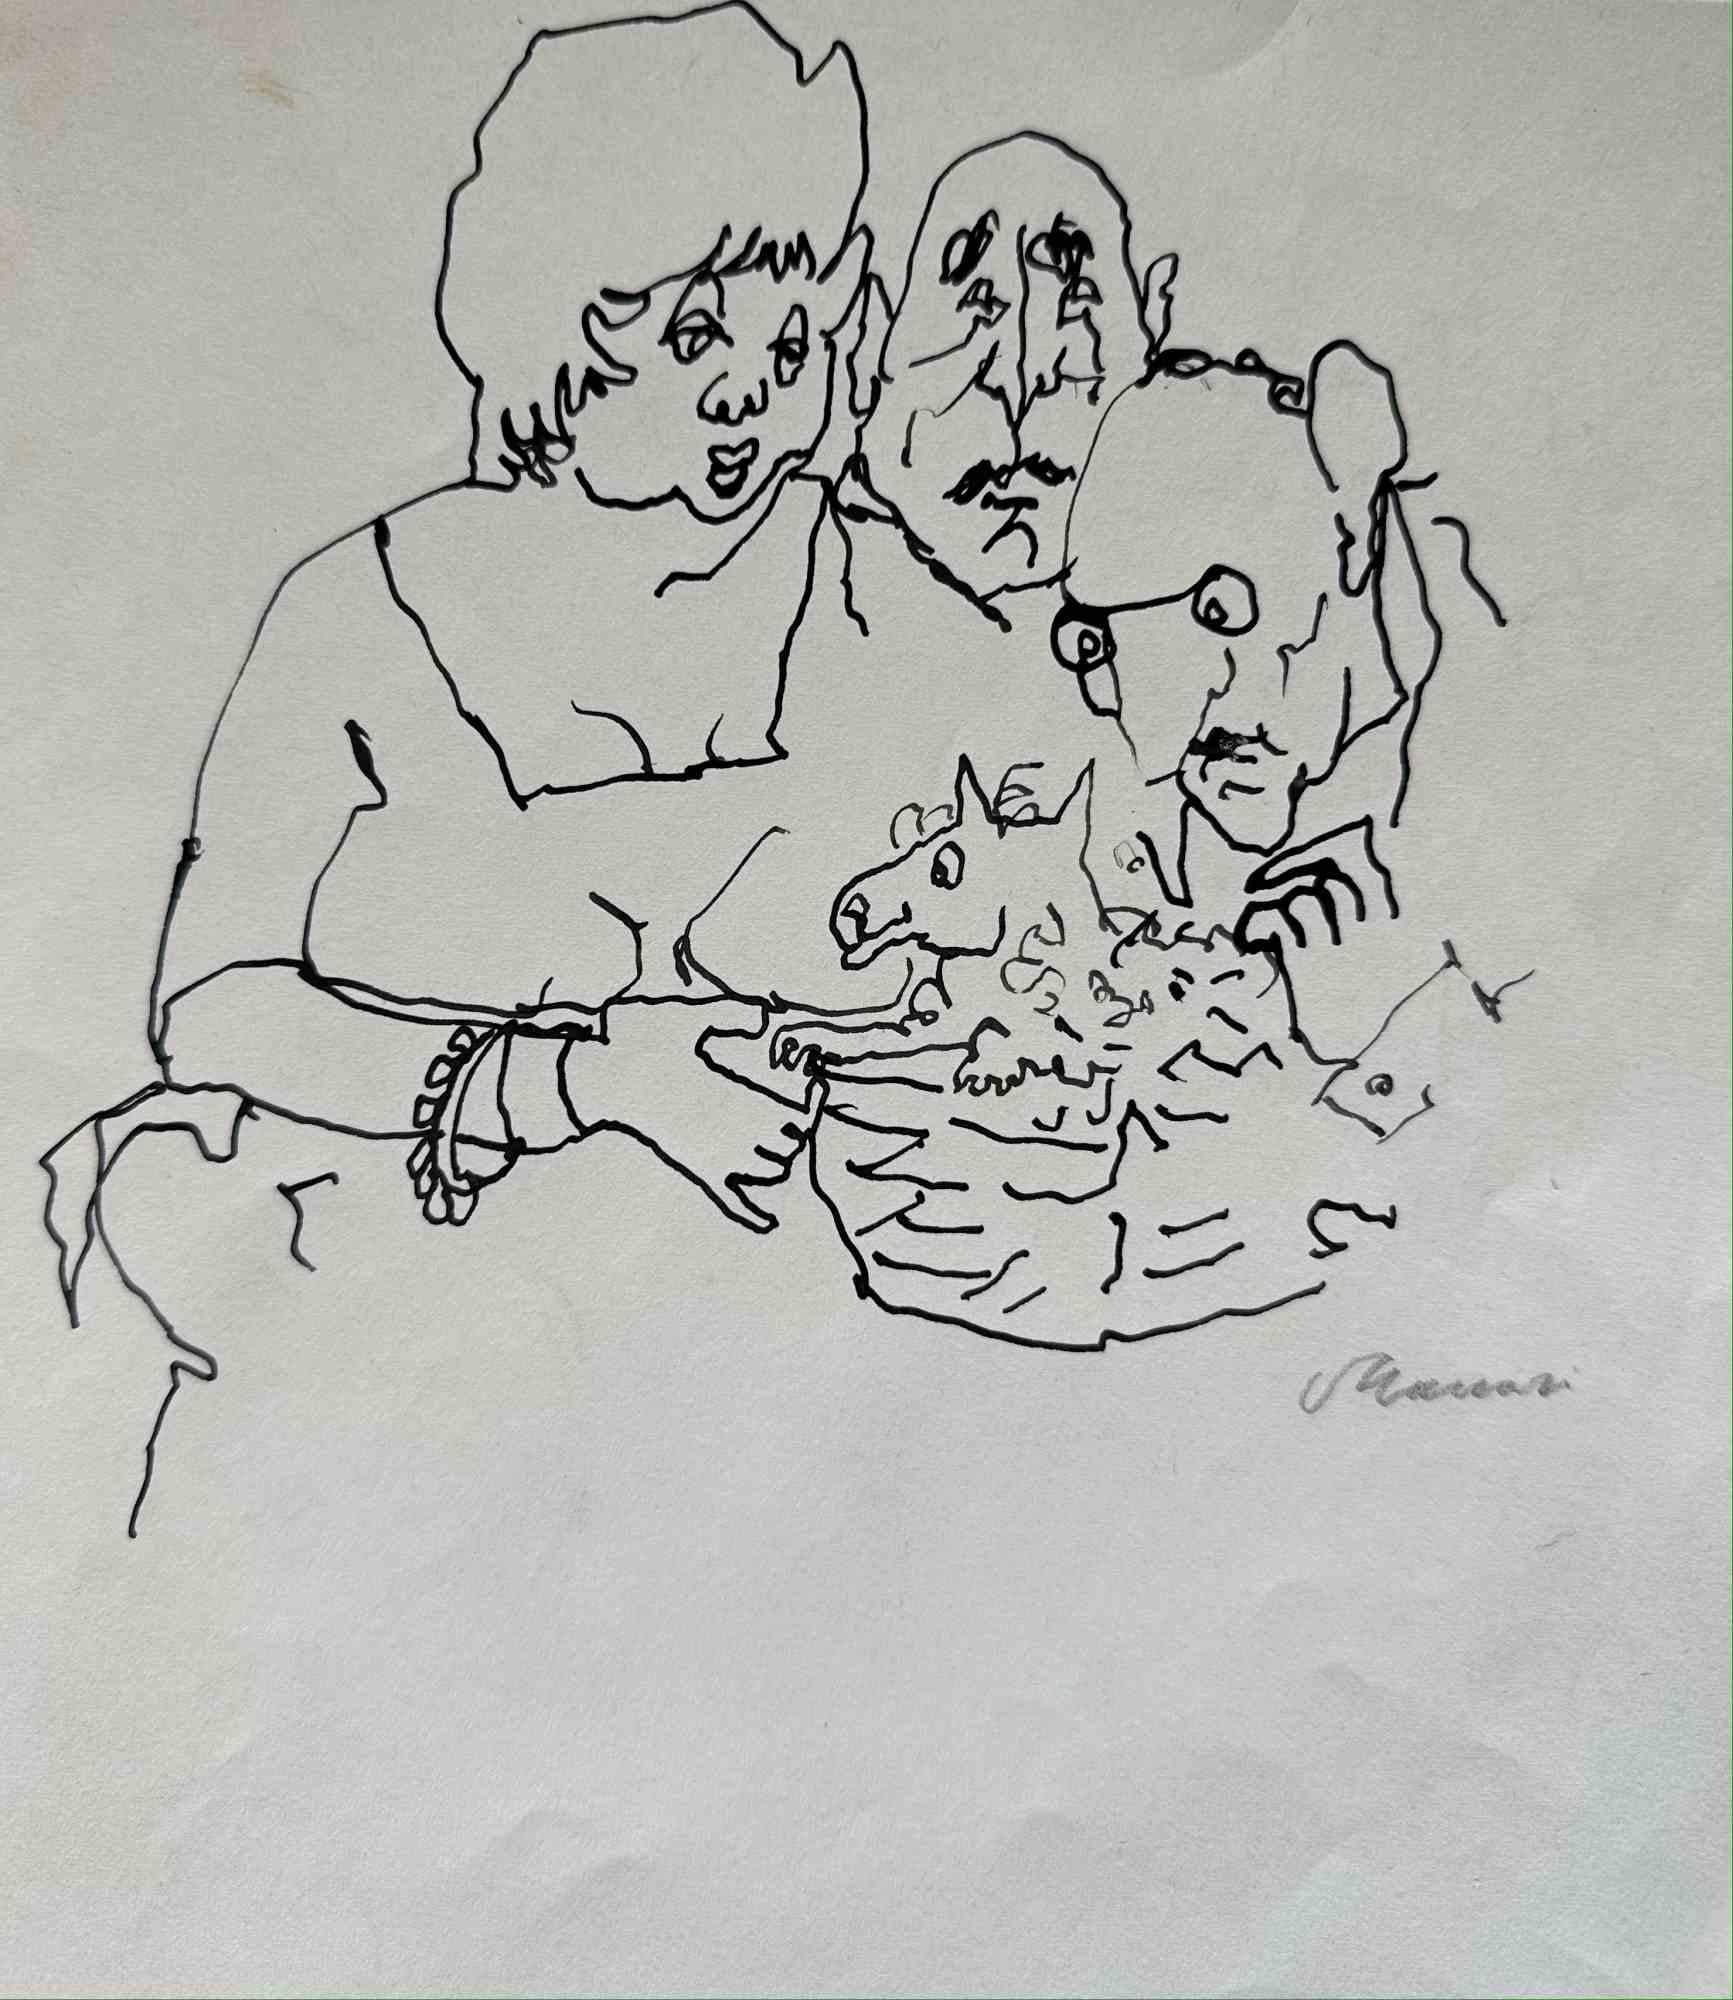 Puppy is a China ink Drawing realized by Mino Maccari  (1924-1989) in the 1950s.

Hand-signed on the lower.

Good conditions.

Mino Maccari (Siena, 1924-Rome, June 16, 1989) was an Italian writer, painter, engraver and journalist, winner of the